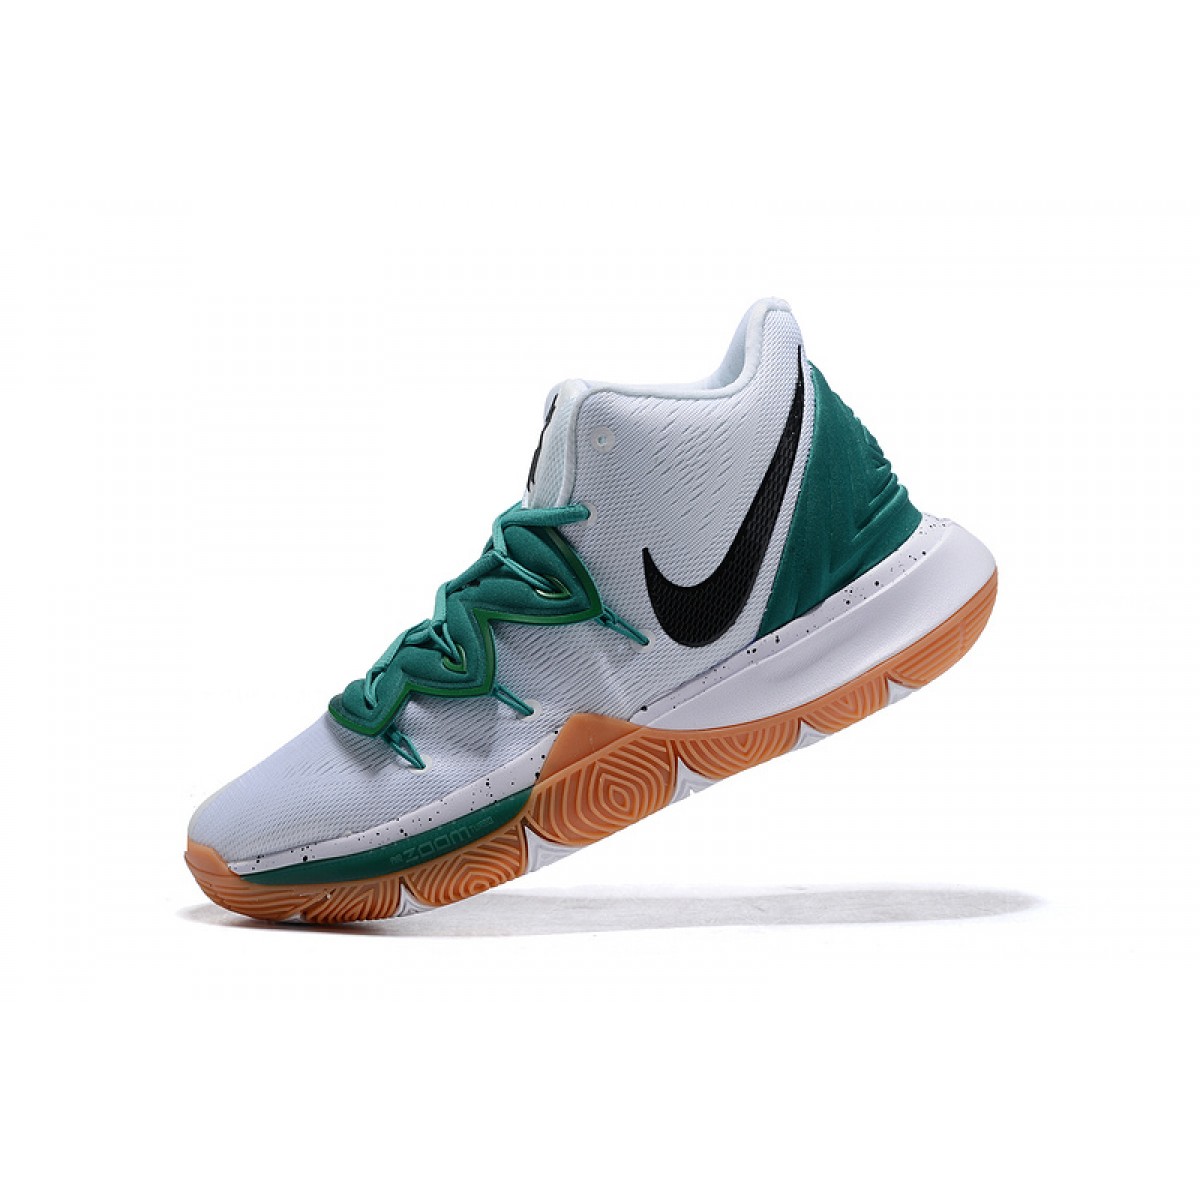 upcoming kyrie 5 shoes